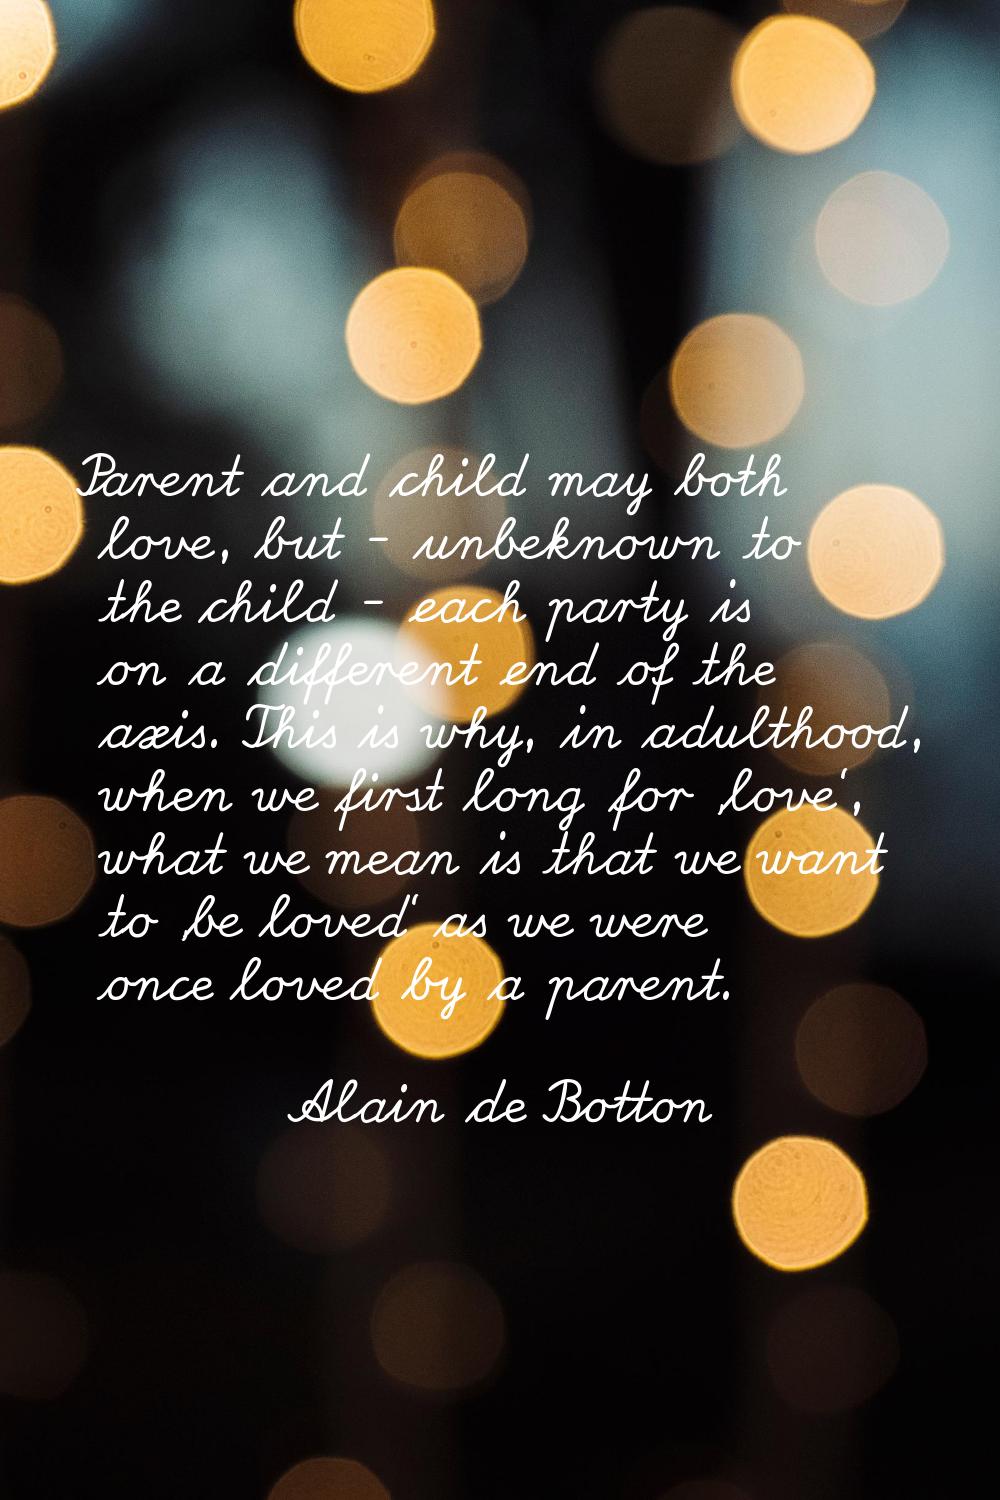 Parent and child may both love, but - unbeknown to the child - each party is on a different end of 